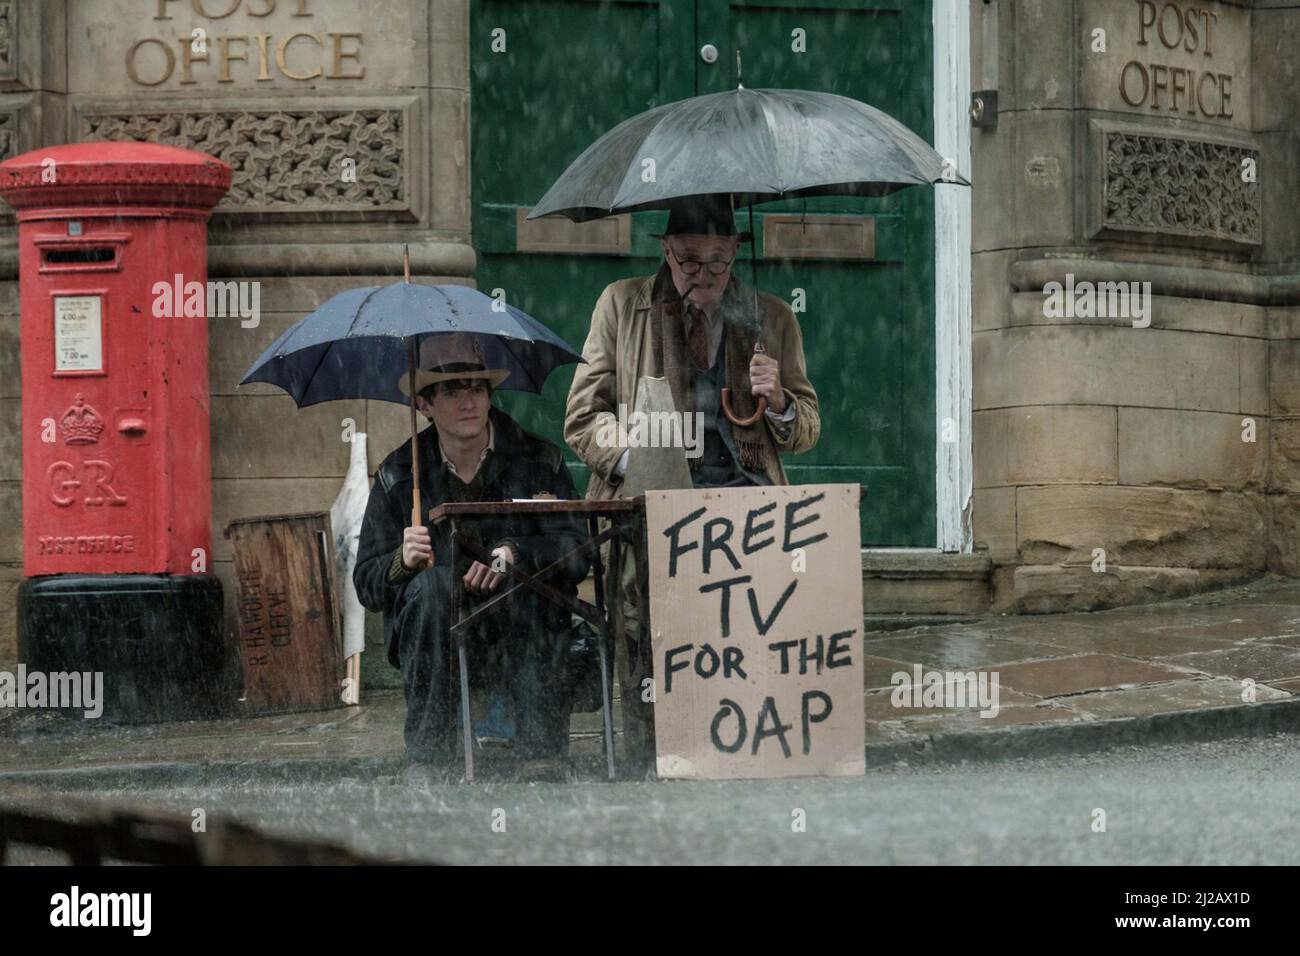 THE DUKE (2020) FIONN WHITEHEAD JIM BROADBENT ROGER MICHELL (DIR) SONY PICTURES CLASSICS/MOVIESTORE COLLECTION Stockfoto